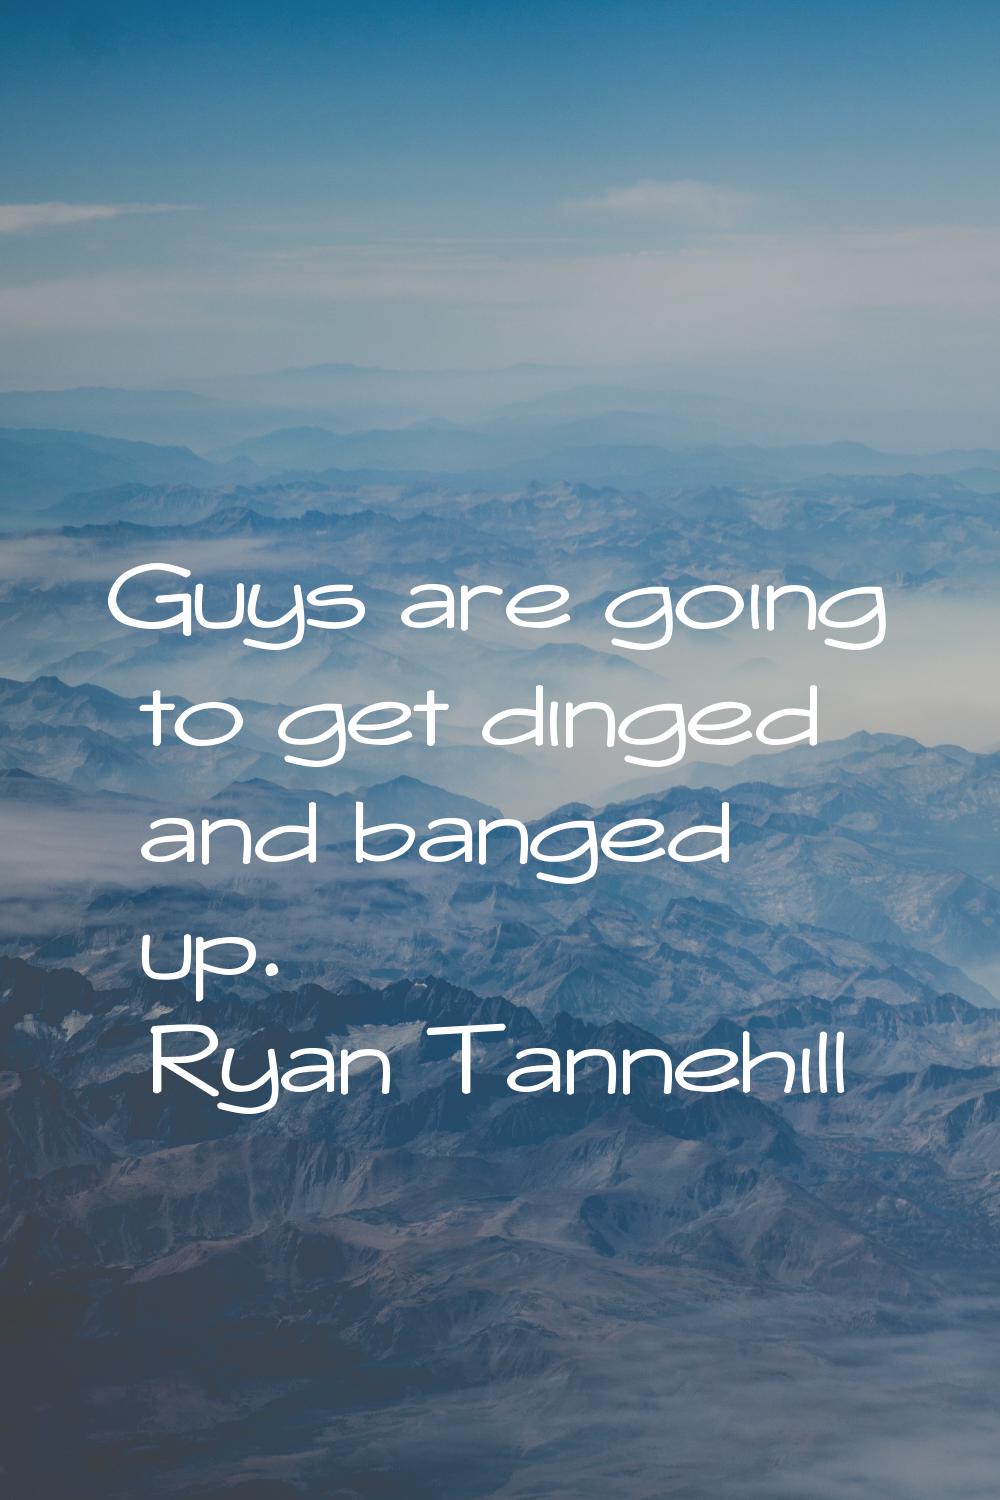 Guys are going to get dinged and banged up.